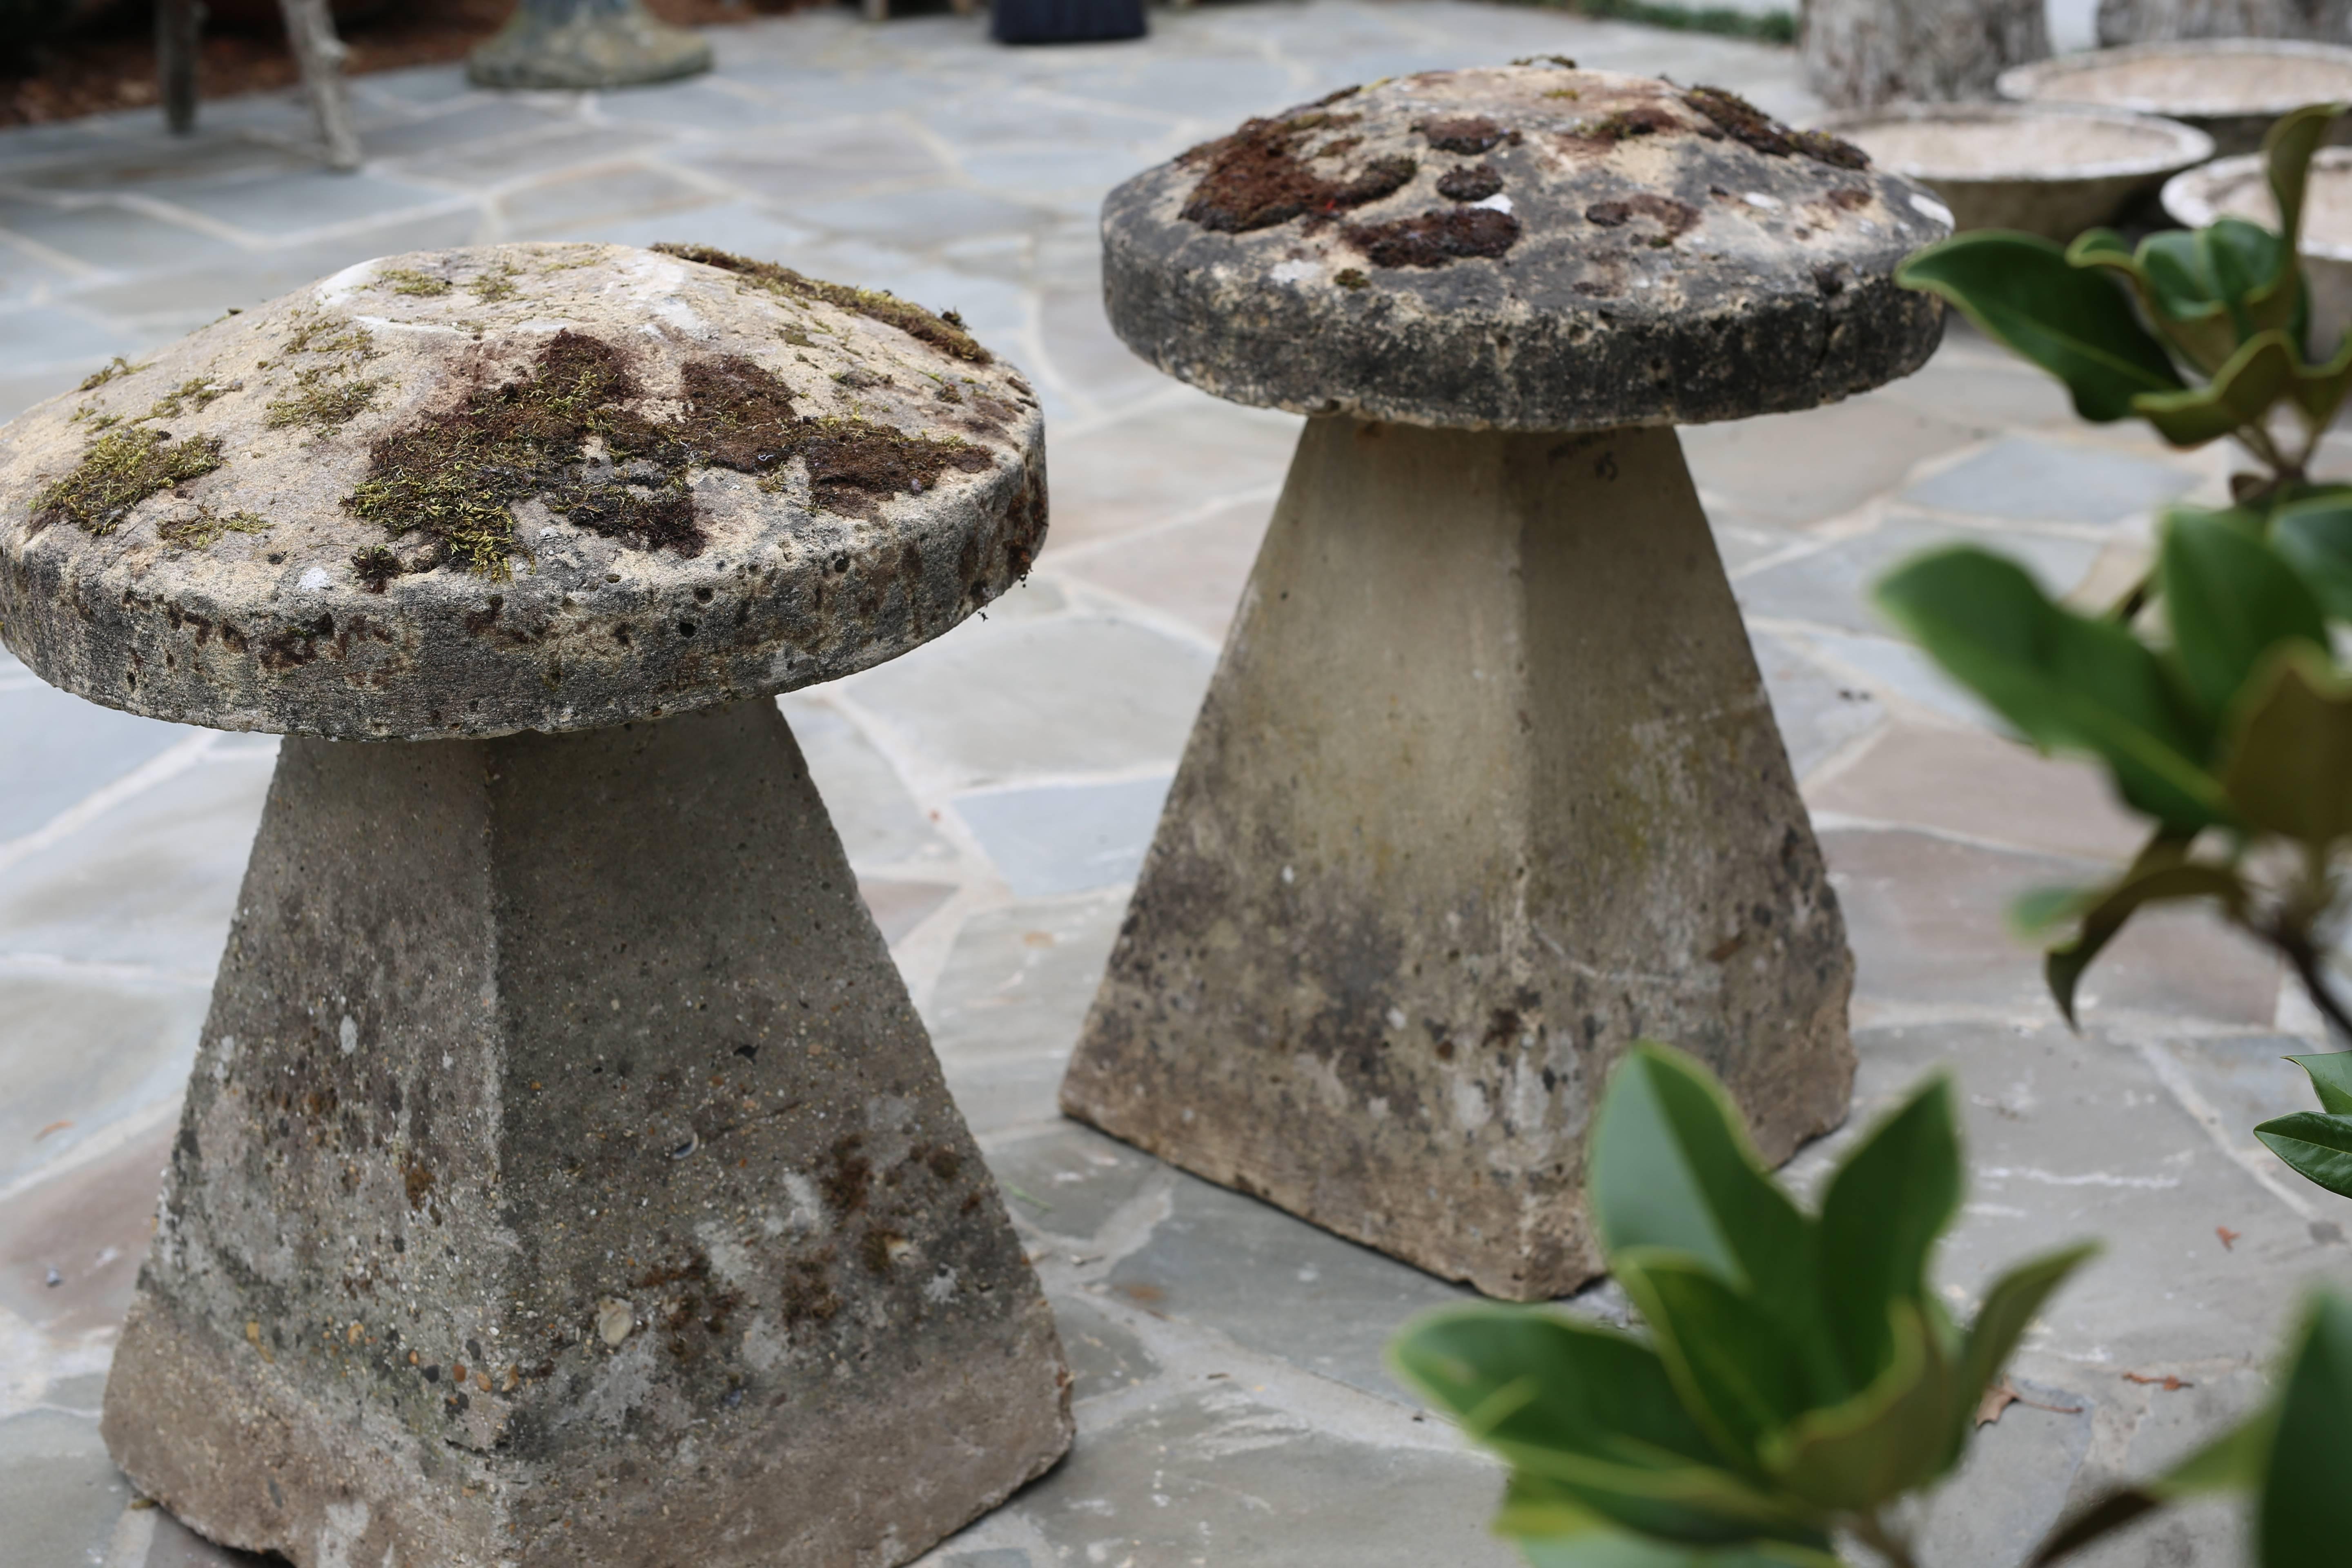 "Staddle Stones" often called mushrooms or toadstools are remnants of the agricultural past. Mainly dating from the 17th and 18th centuries they were practical foundation stones, keeping wooden structures from rotting, with the cap also